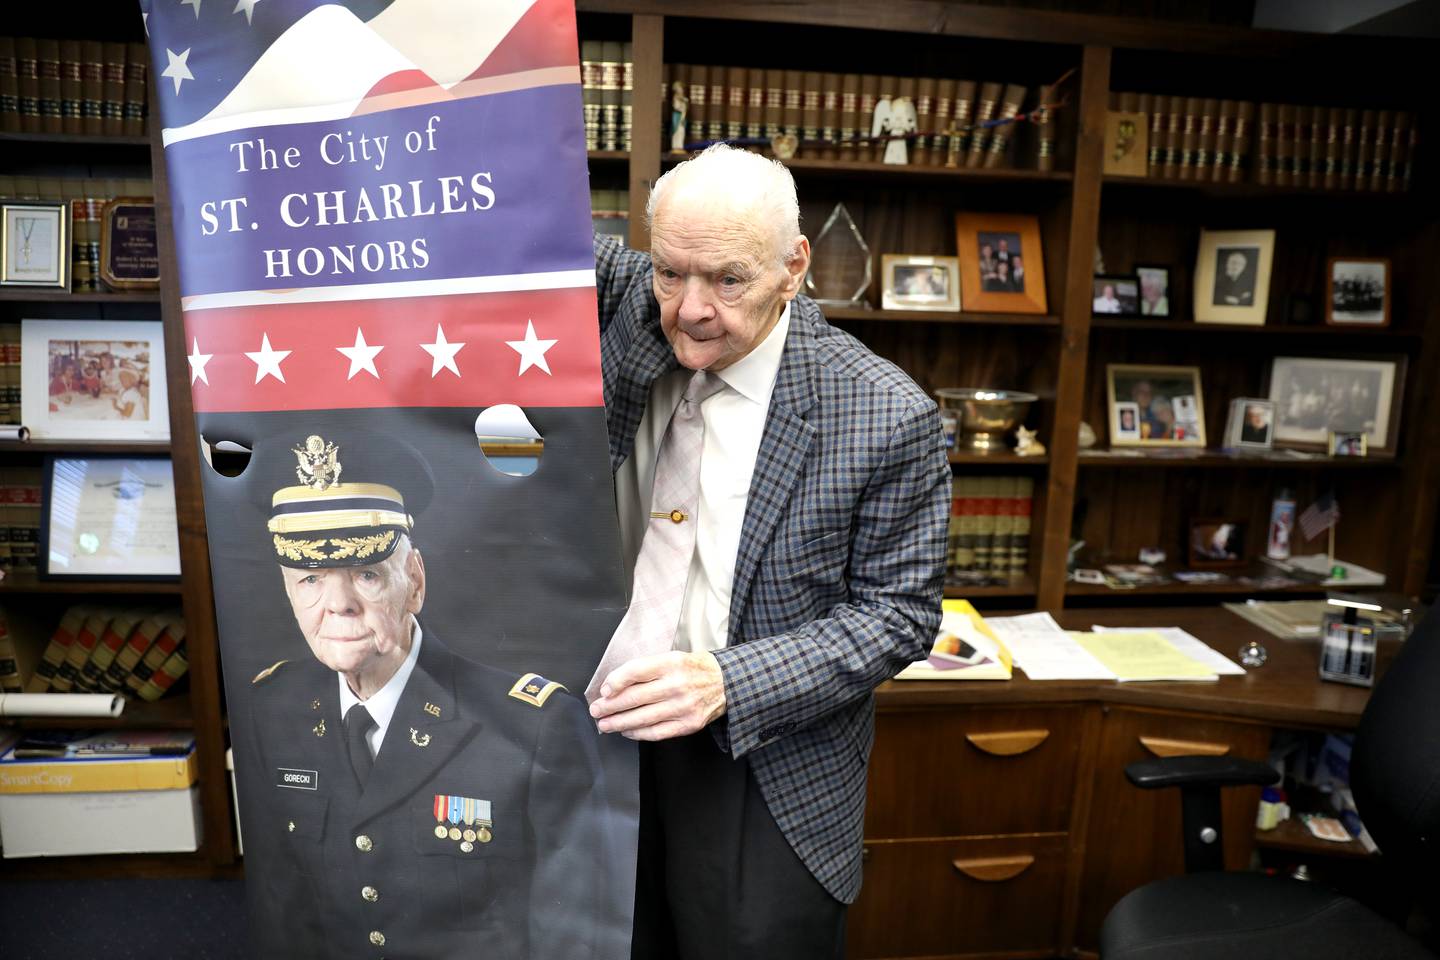 Robert Gorecki, a Korean War veteran and St. Charles attorney, is a longtime member of the St. Charles VFW Post 5036 and the American Legion.